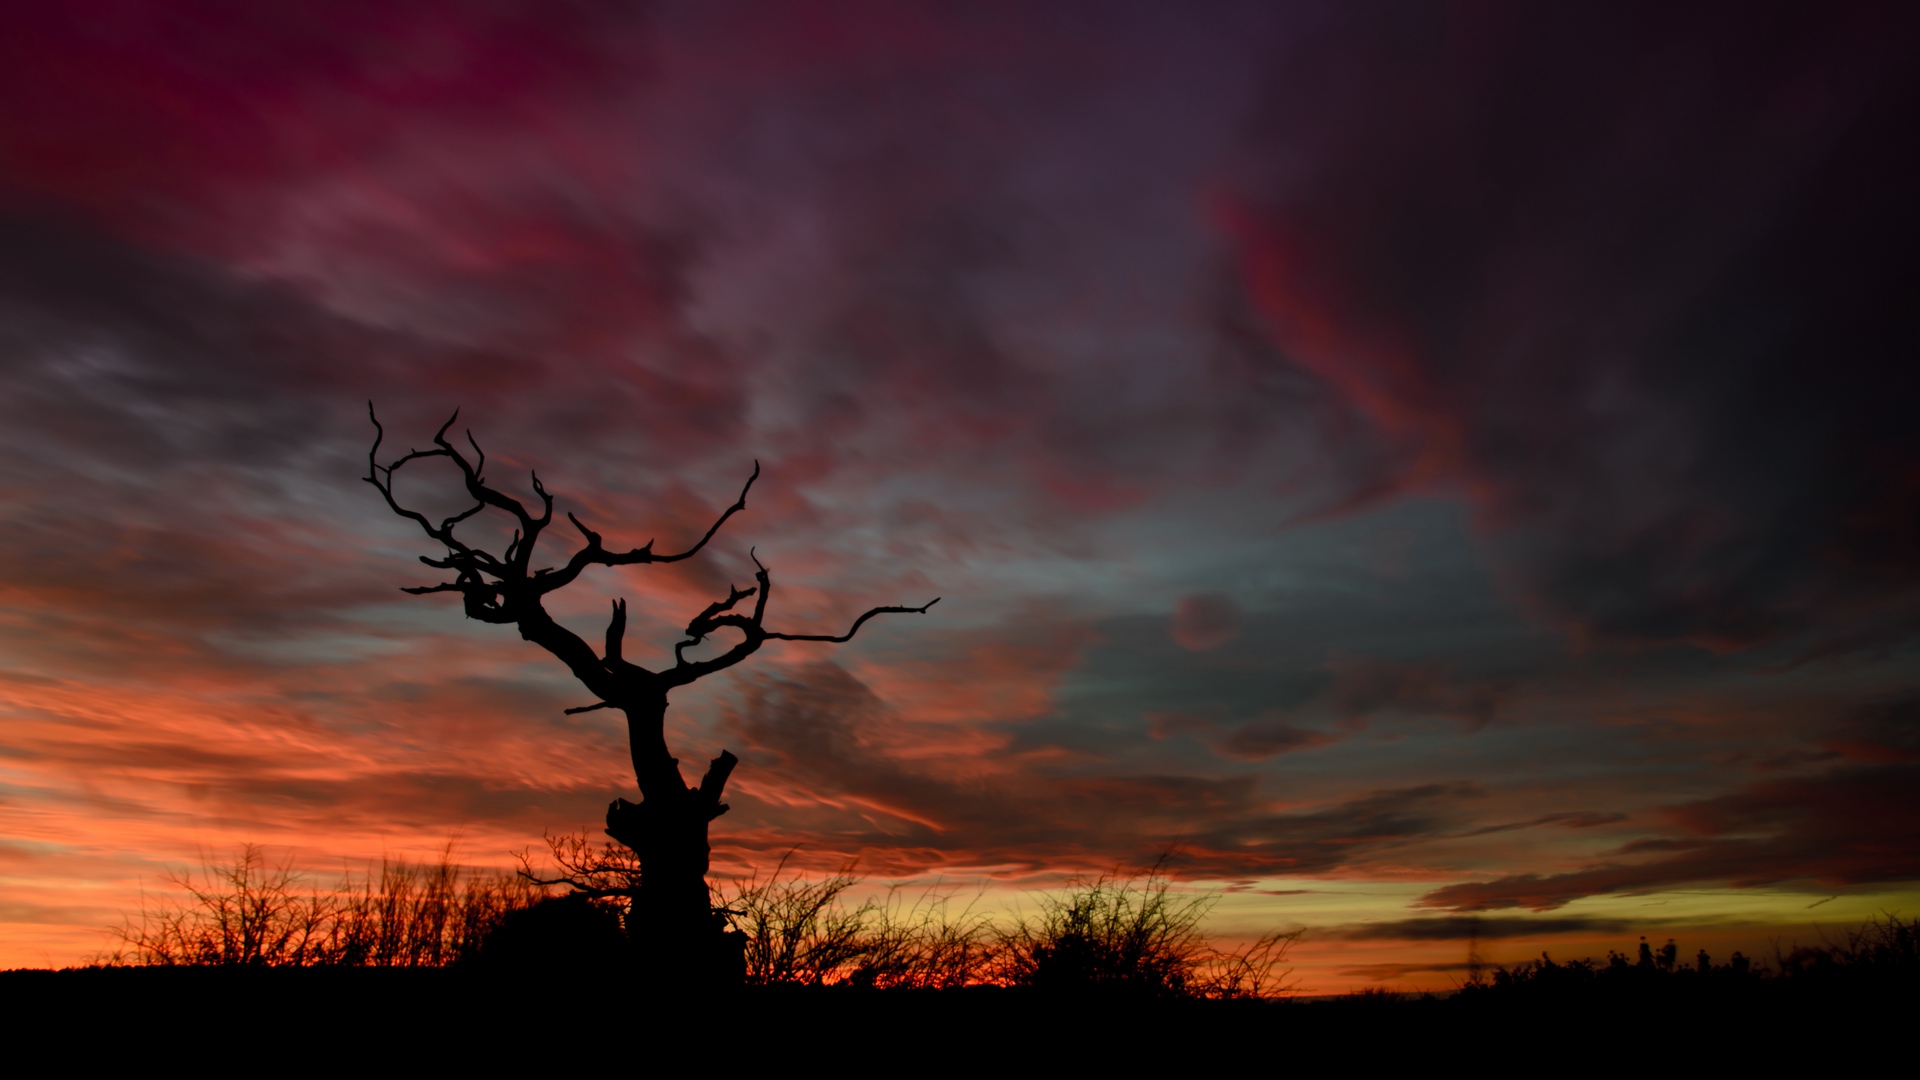 General 1920x1080 trees silhouette sunset night sky dusk dead trees red orange nature